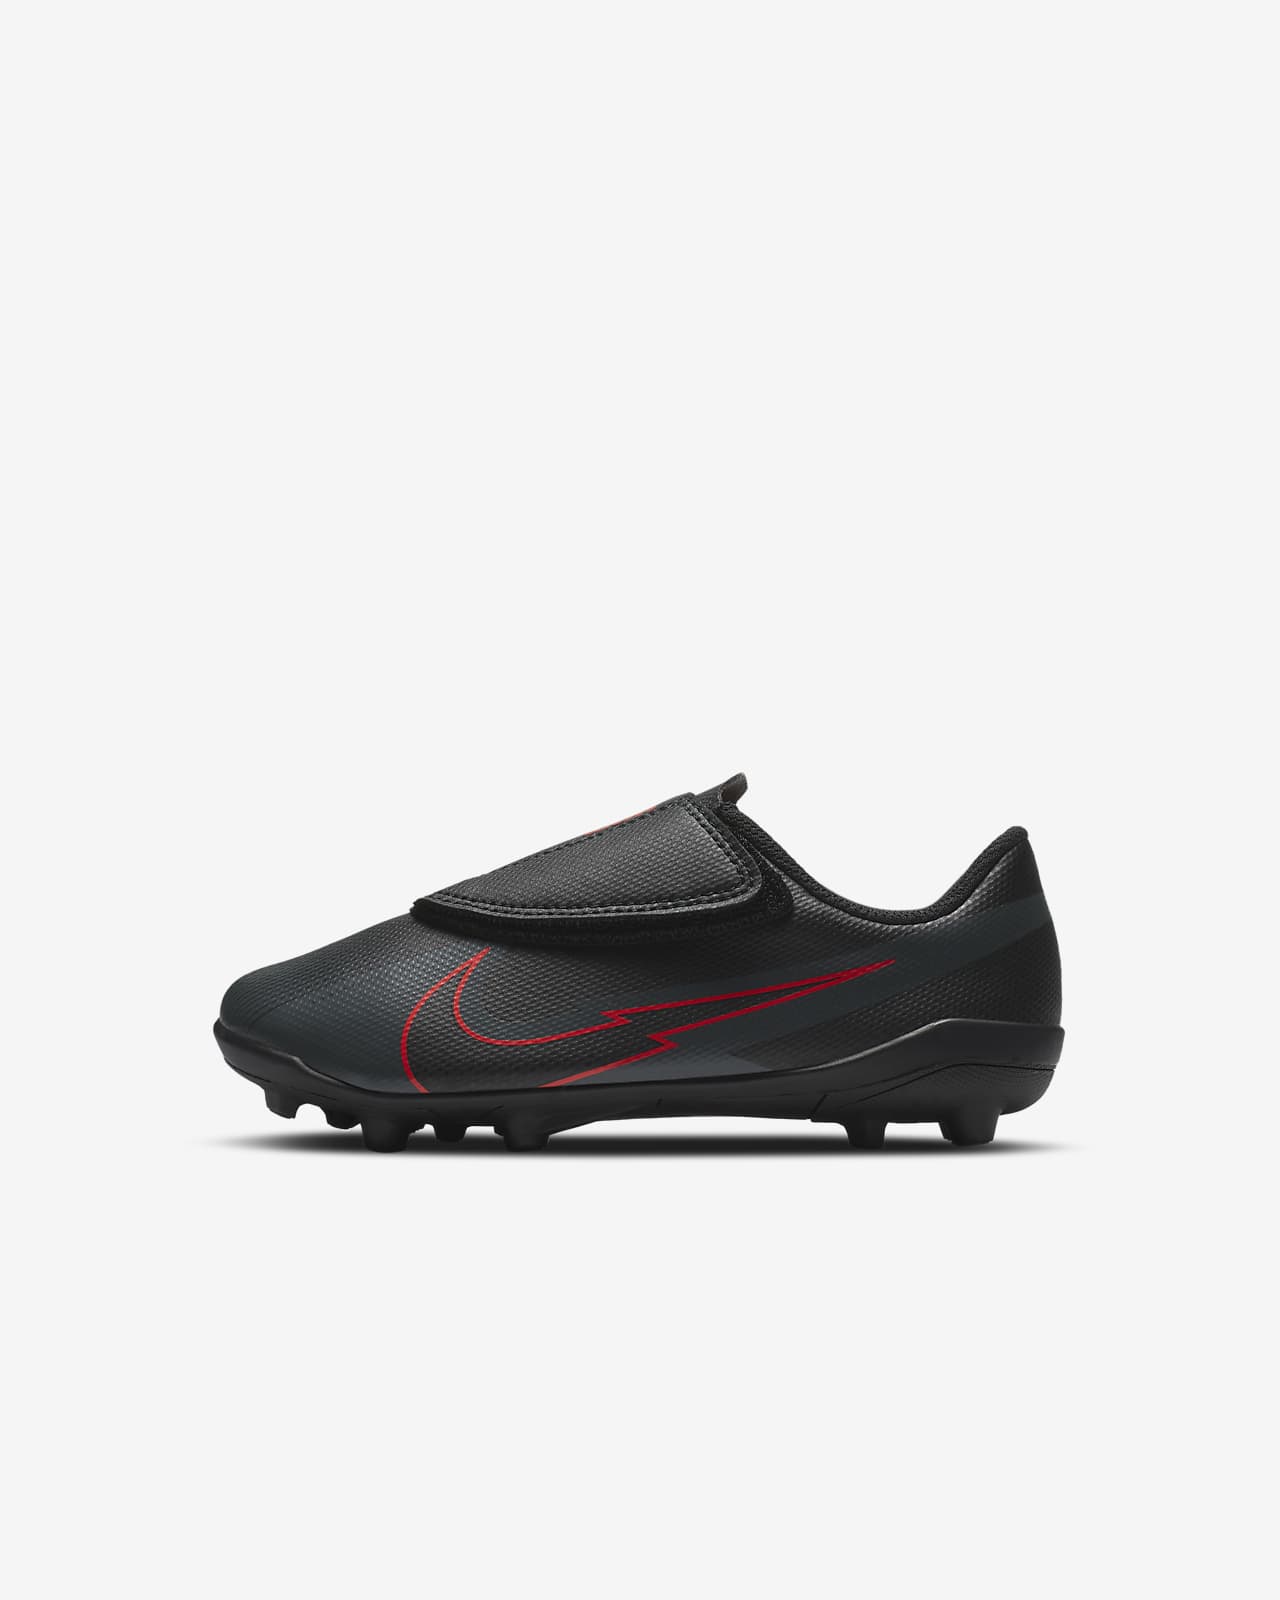 size 13c soccer cleats